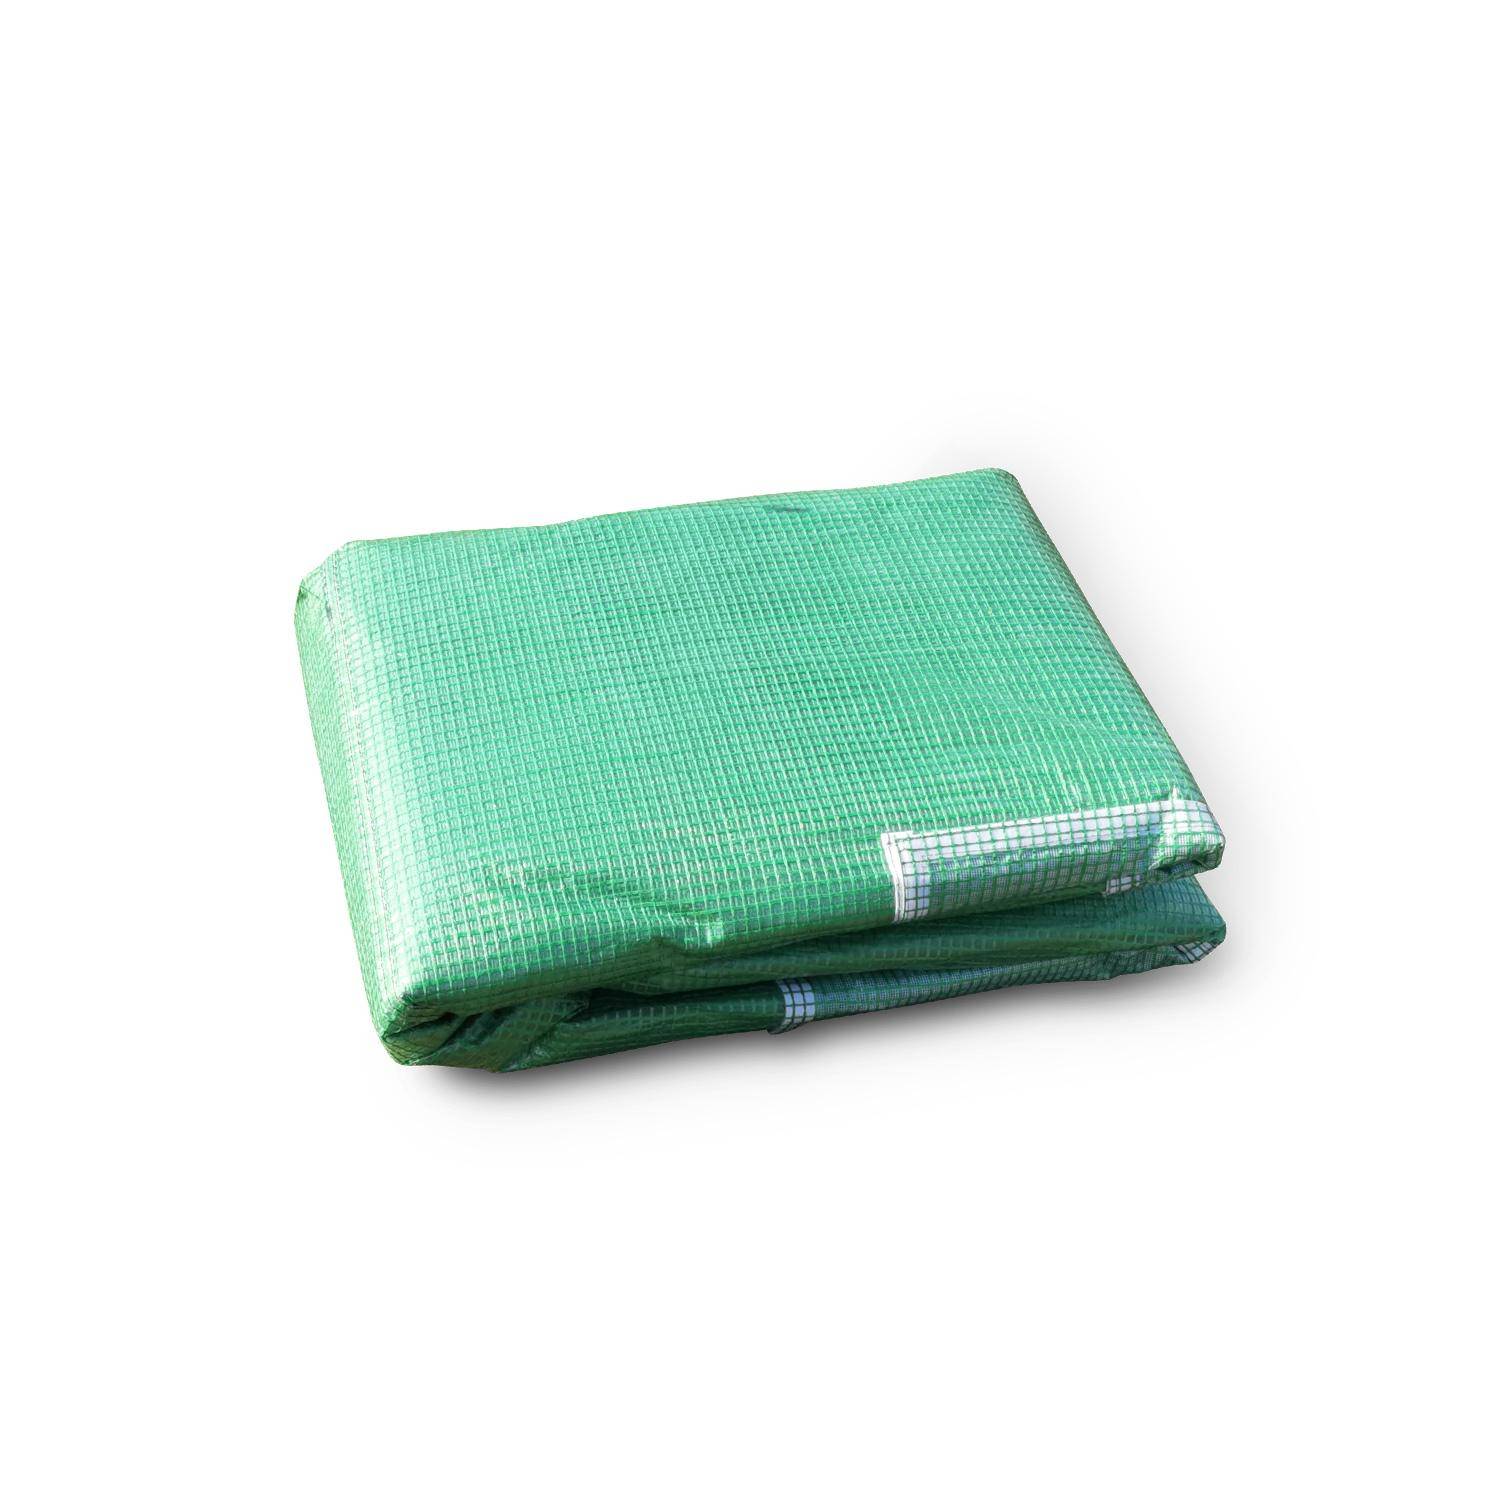 Replacement greenhouse cover - 9 sq metres - Romarin - Green  Photo1